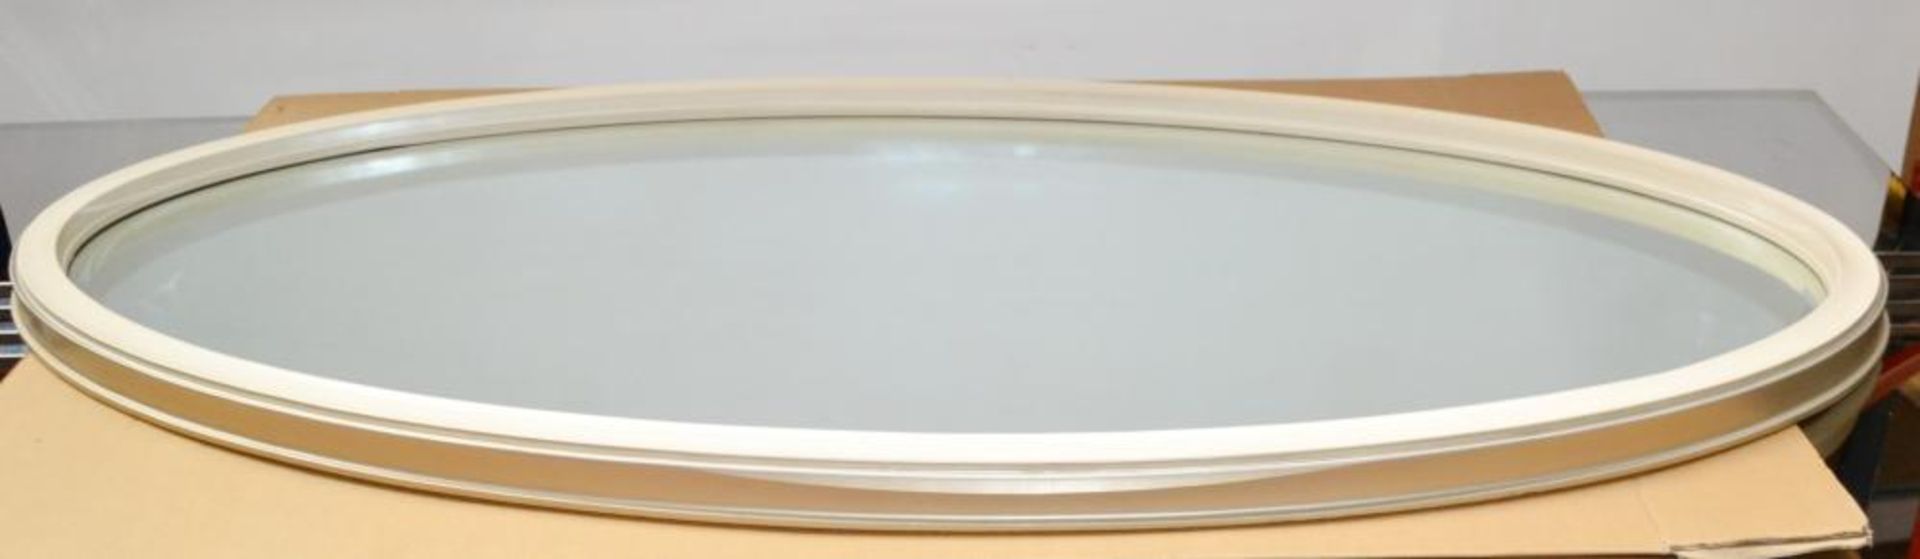 1 x BARBARA BARRY 'Horizon' Designer Oval Mirror With An Ivory Frame - Made In America - Dimensions: - Image 3 of 7